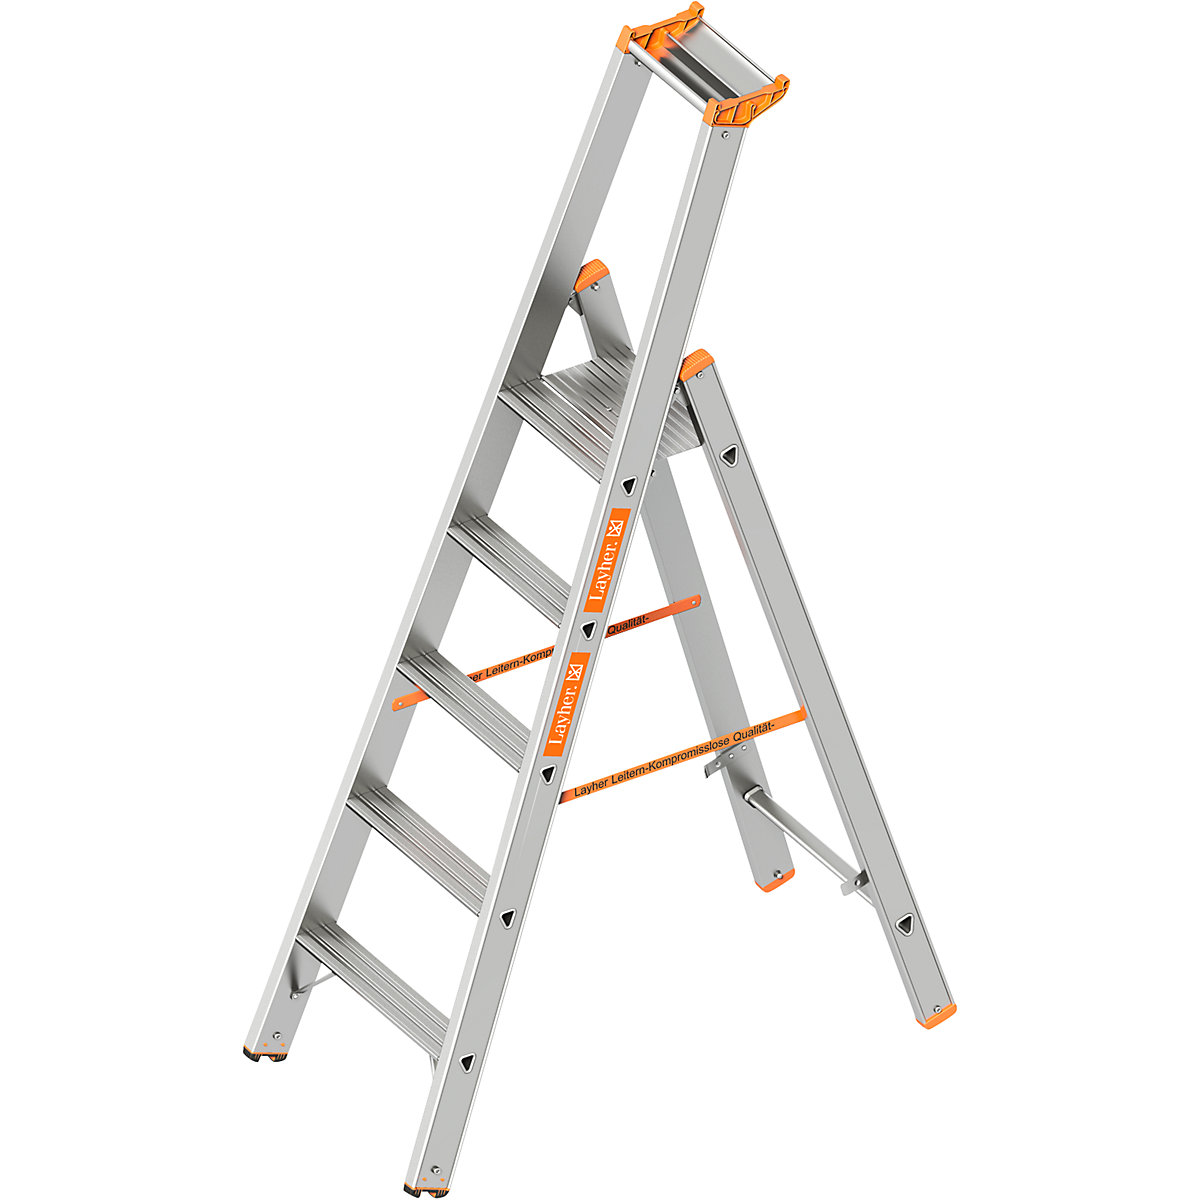 Step ladder – Layher, single sided access, 5 steps incl. platform-2